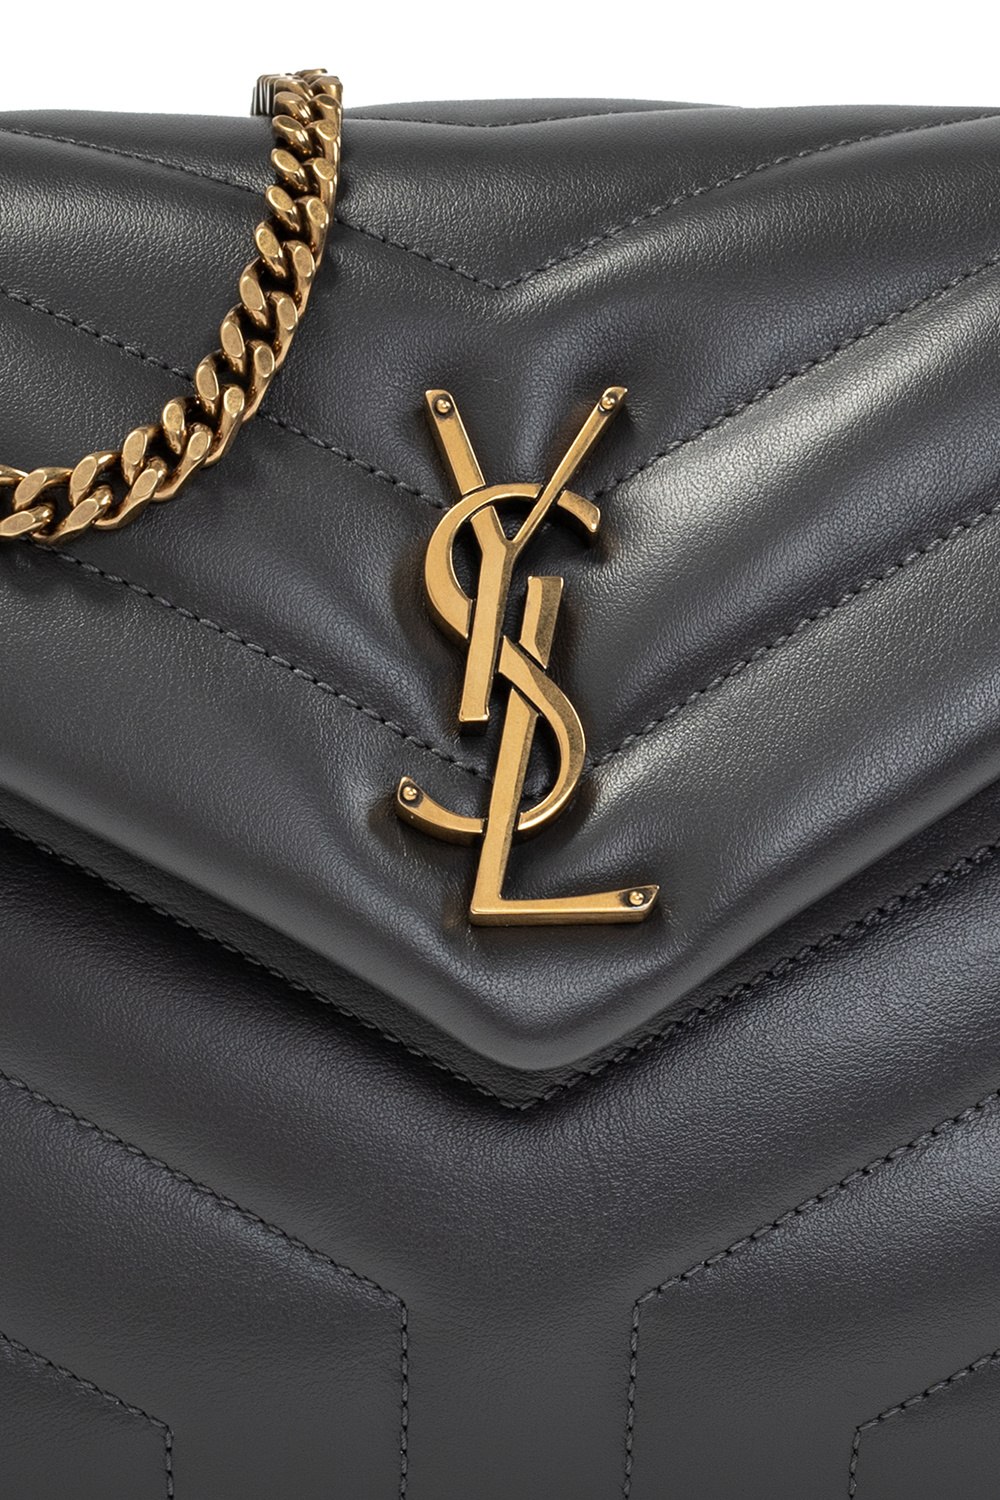 FIRST IMPRESSION OF YSL MINI LOULOU/ WHAT FITS/ MINI LOULOU VS TOY LOULOU 